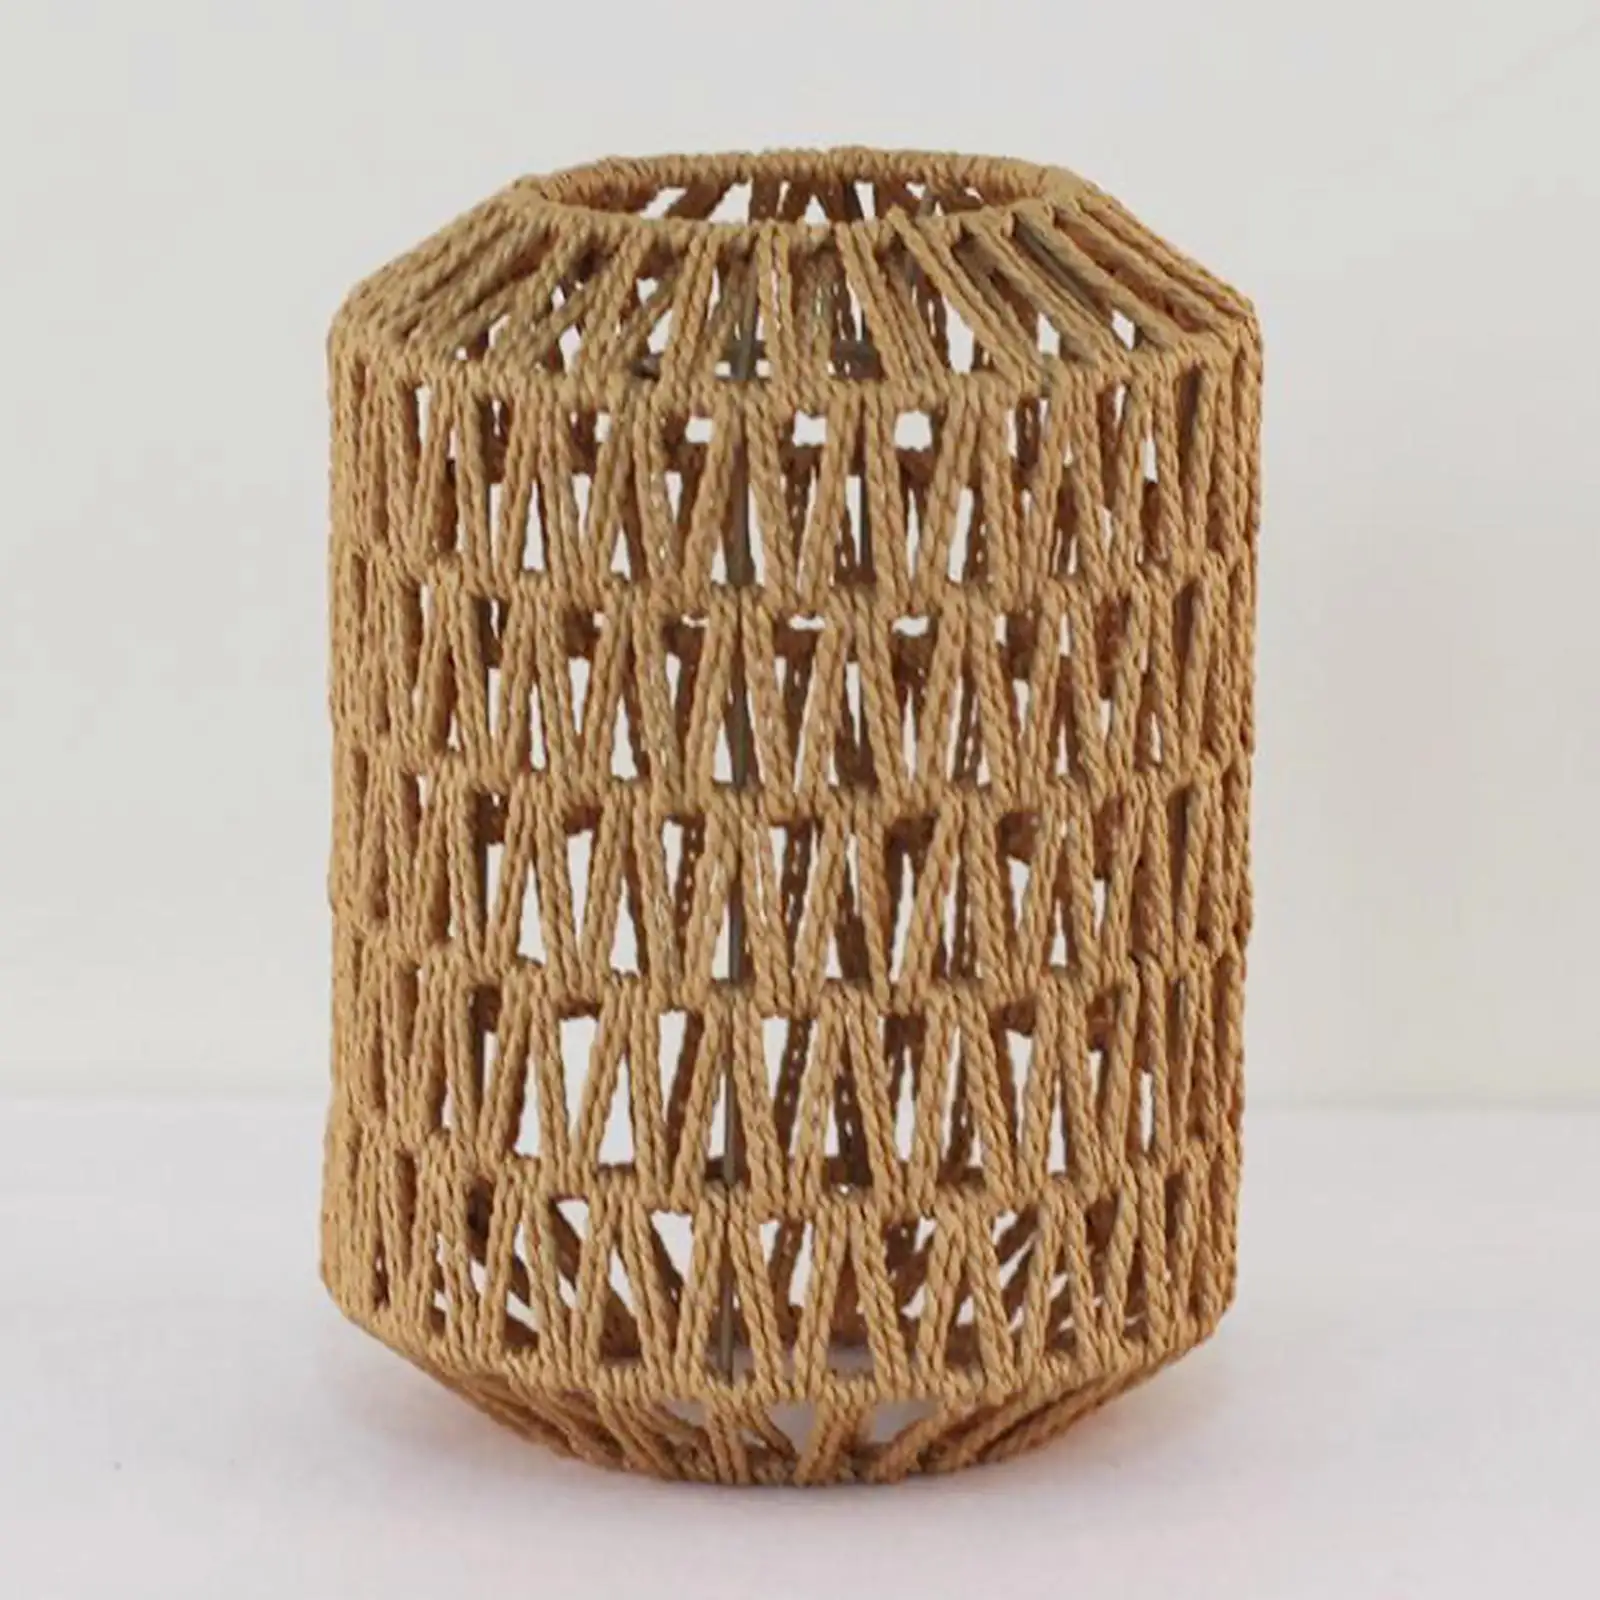 Handwoven Rattan Lamp Shade Ceiling Light Shade Paper Rope Lampshade for Restaurant Living Room Cafe Bedroom